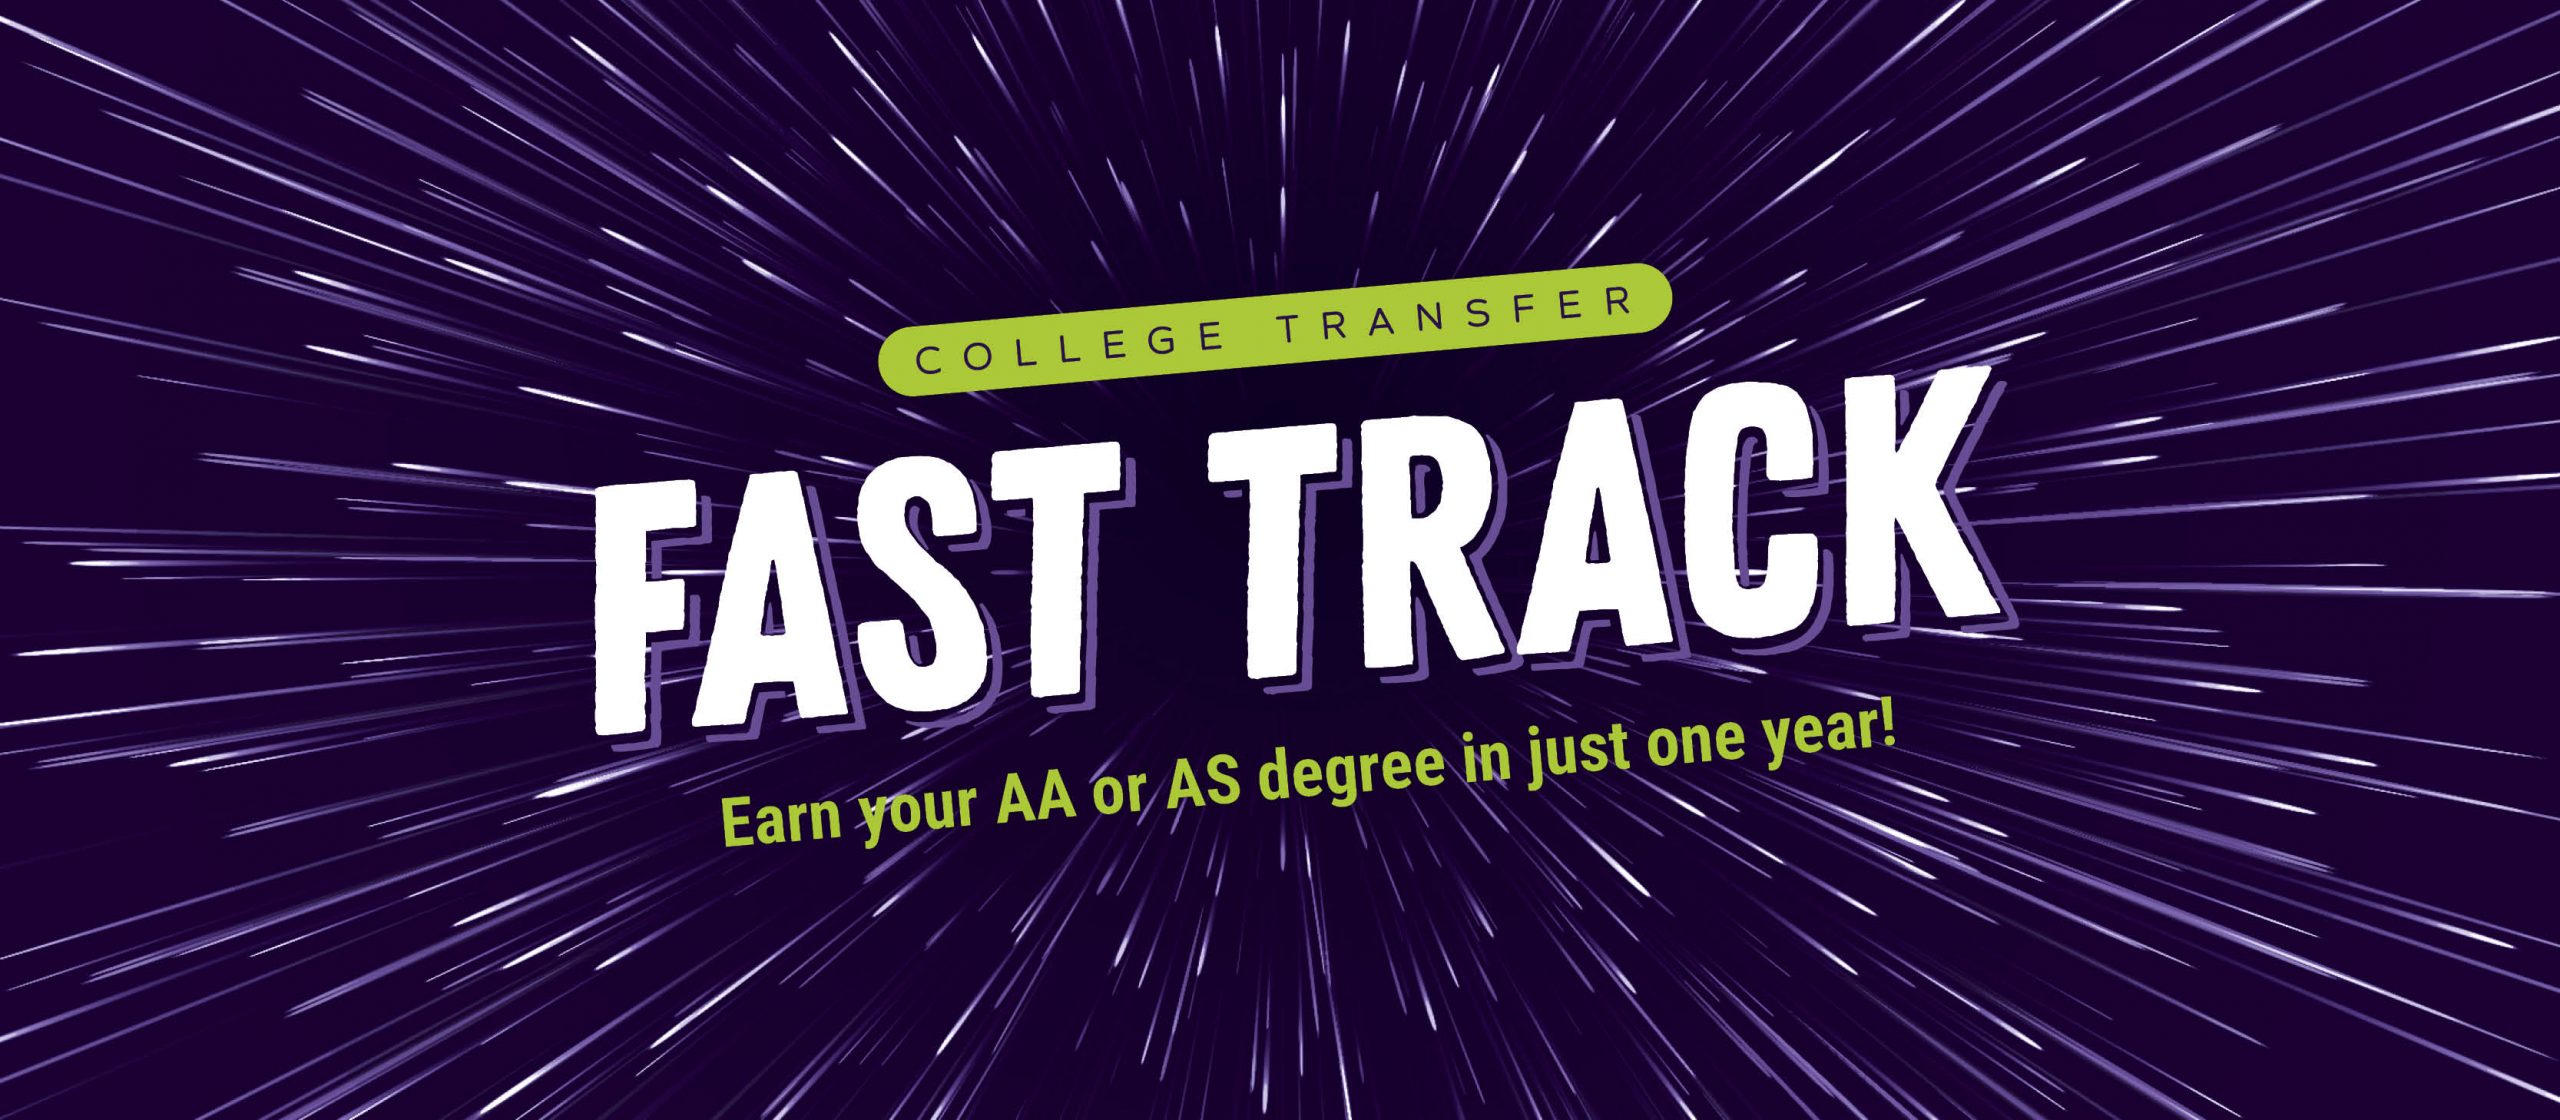 College Transfer Fast Track, Earn Your AA or AS degree in just one year!